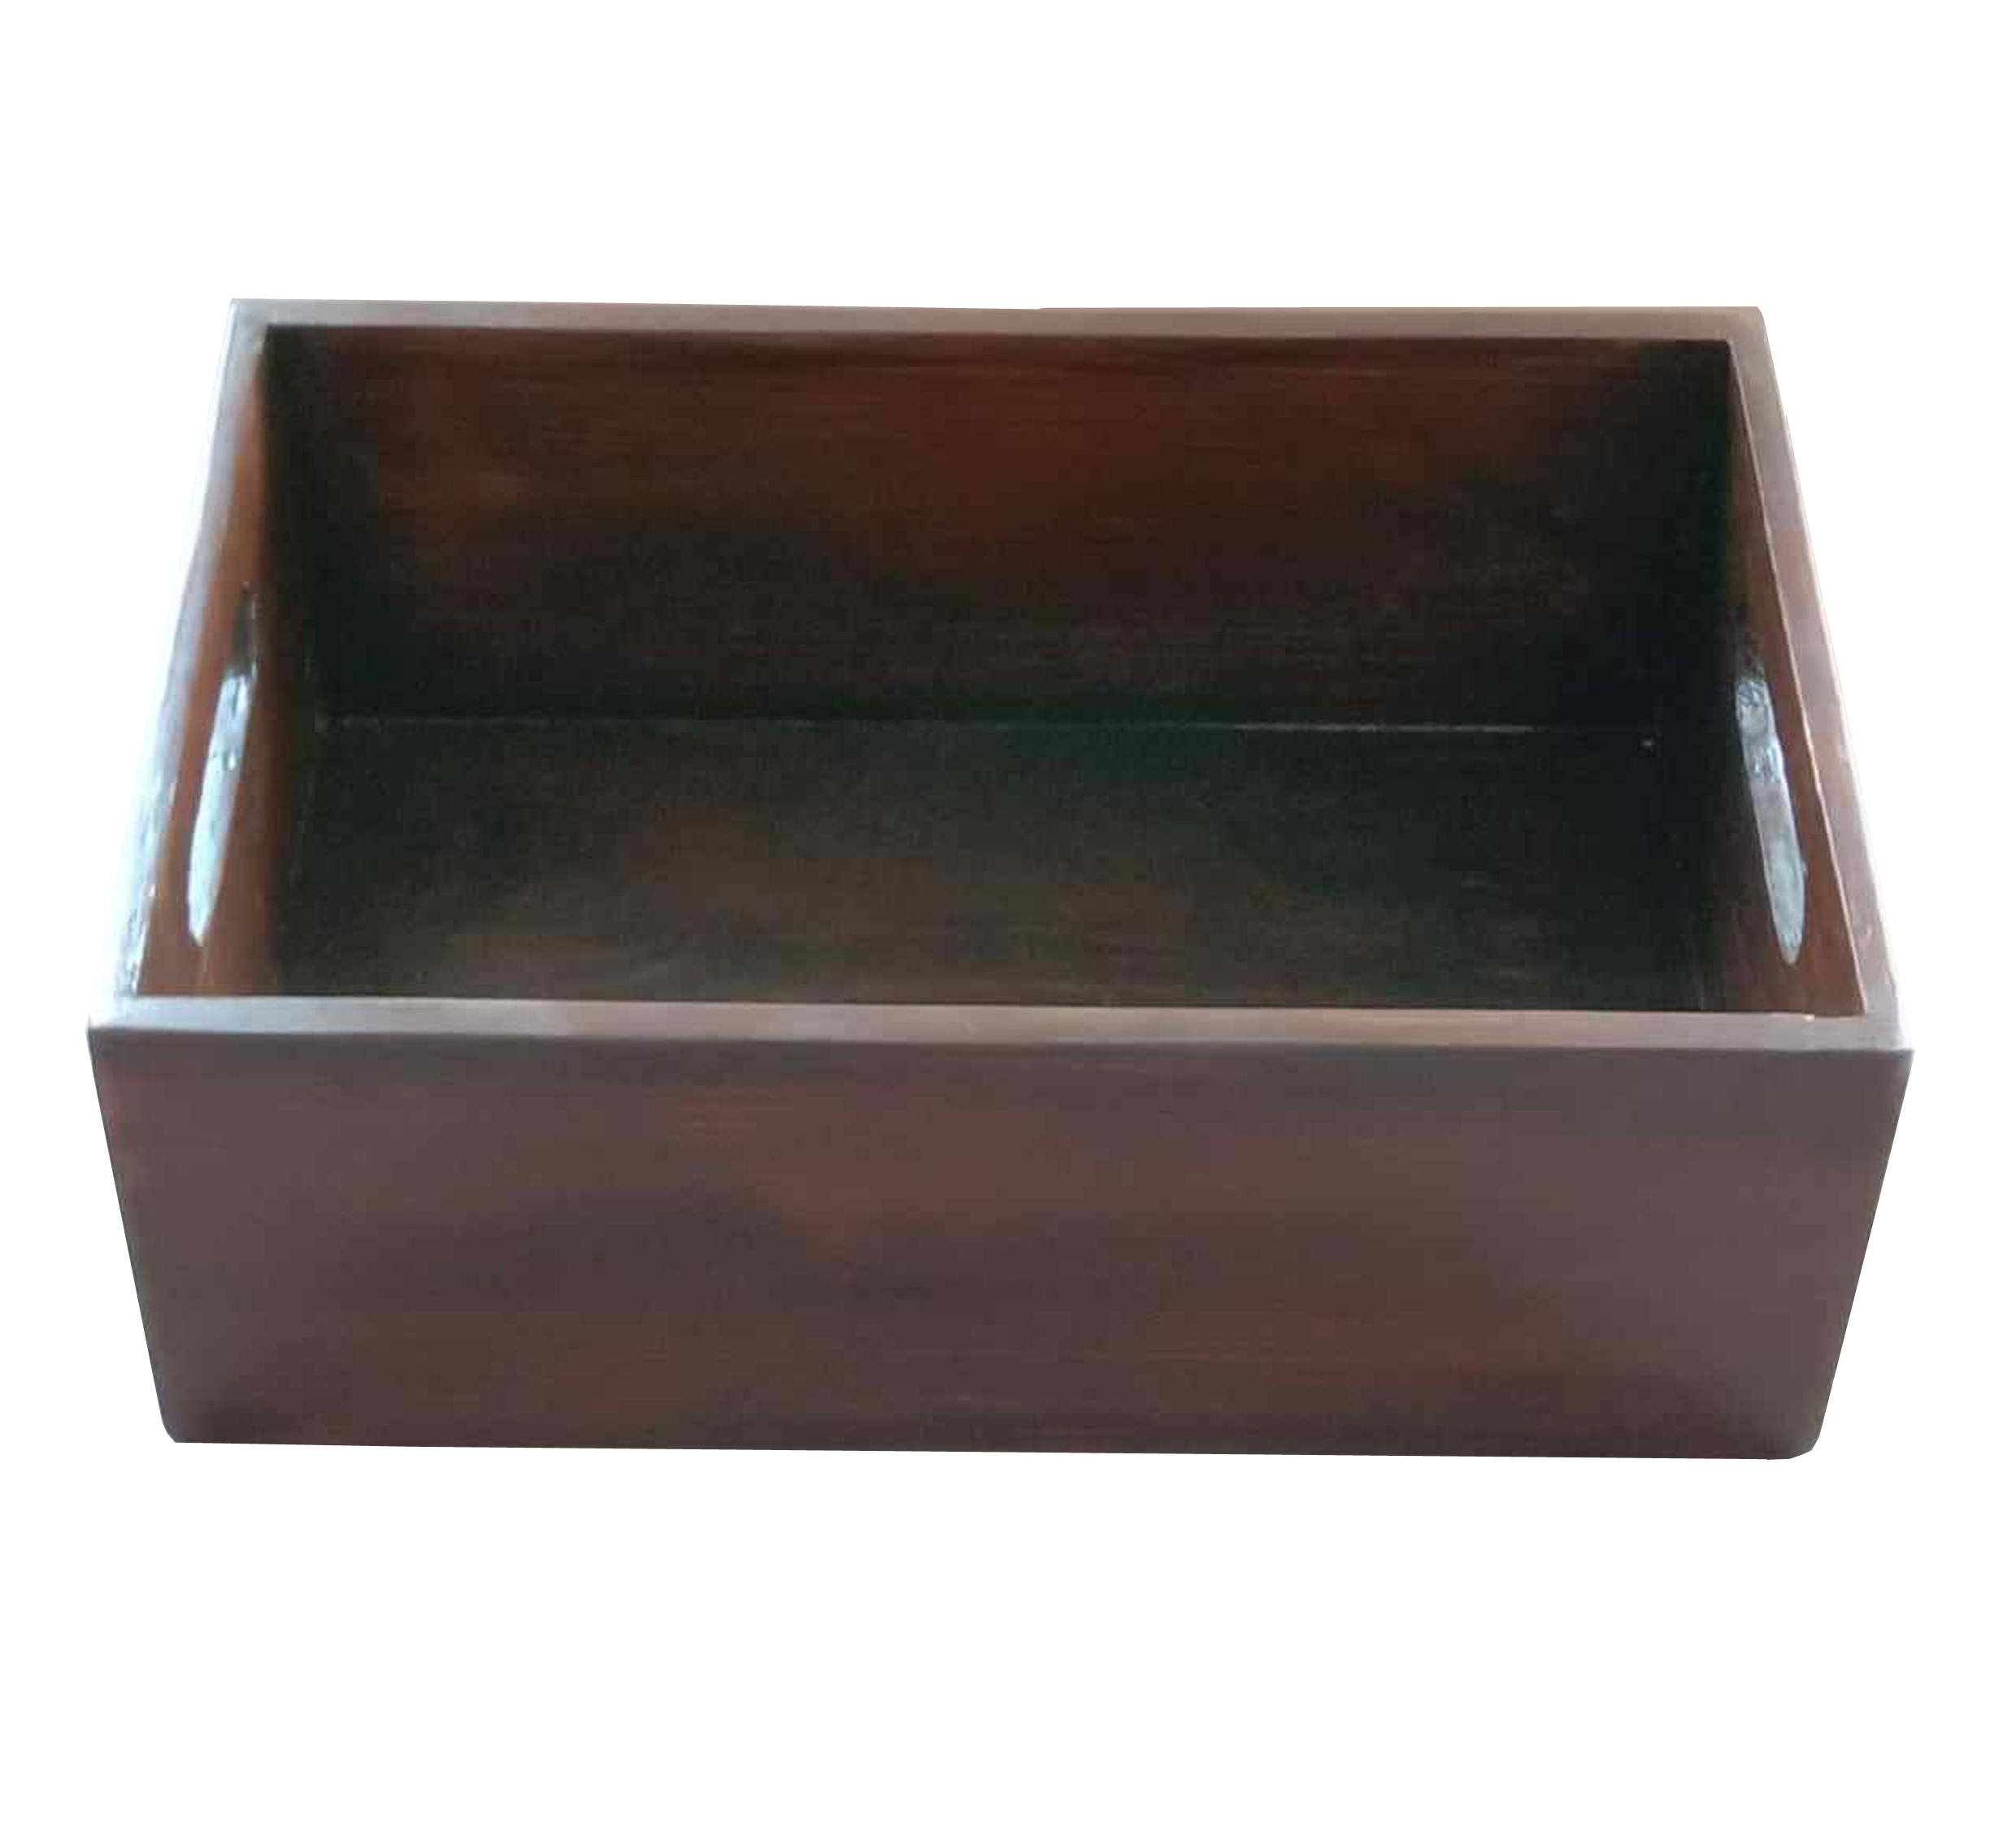 Wooden Storage and Gift Boxes cum Organisers.